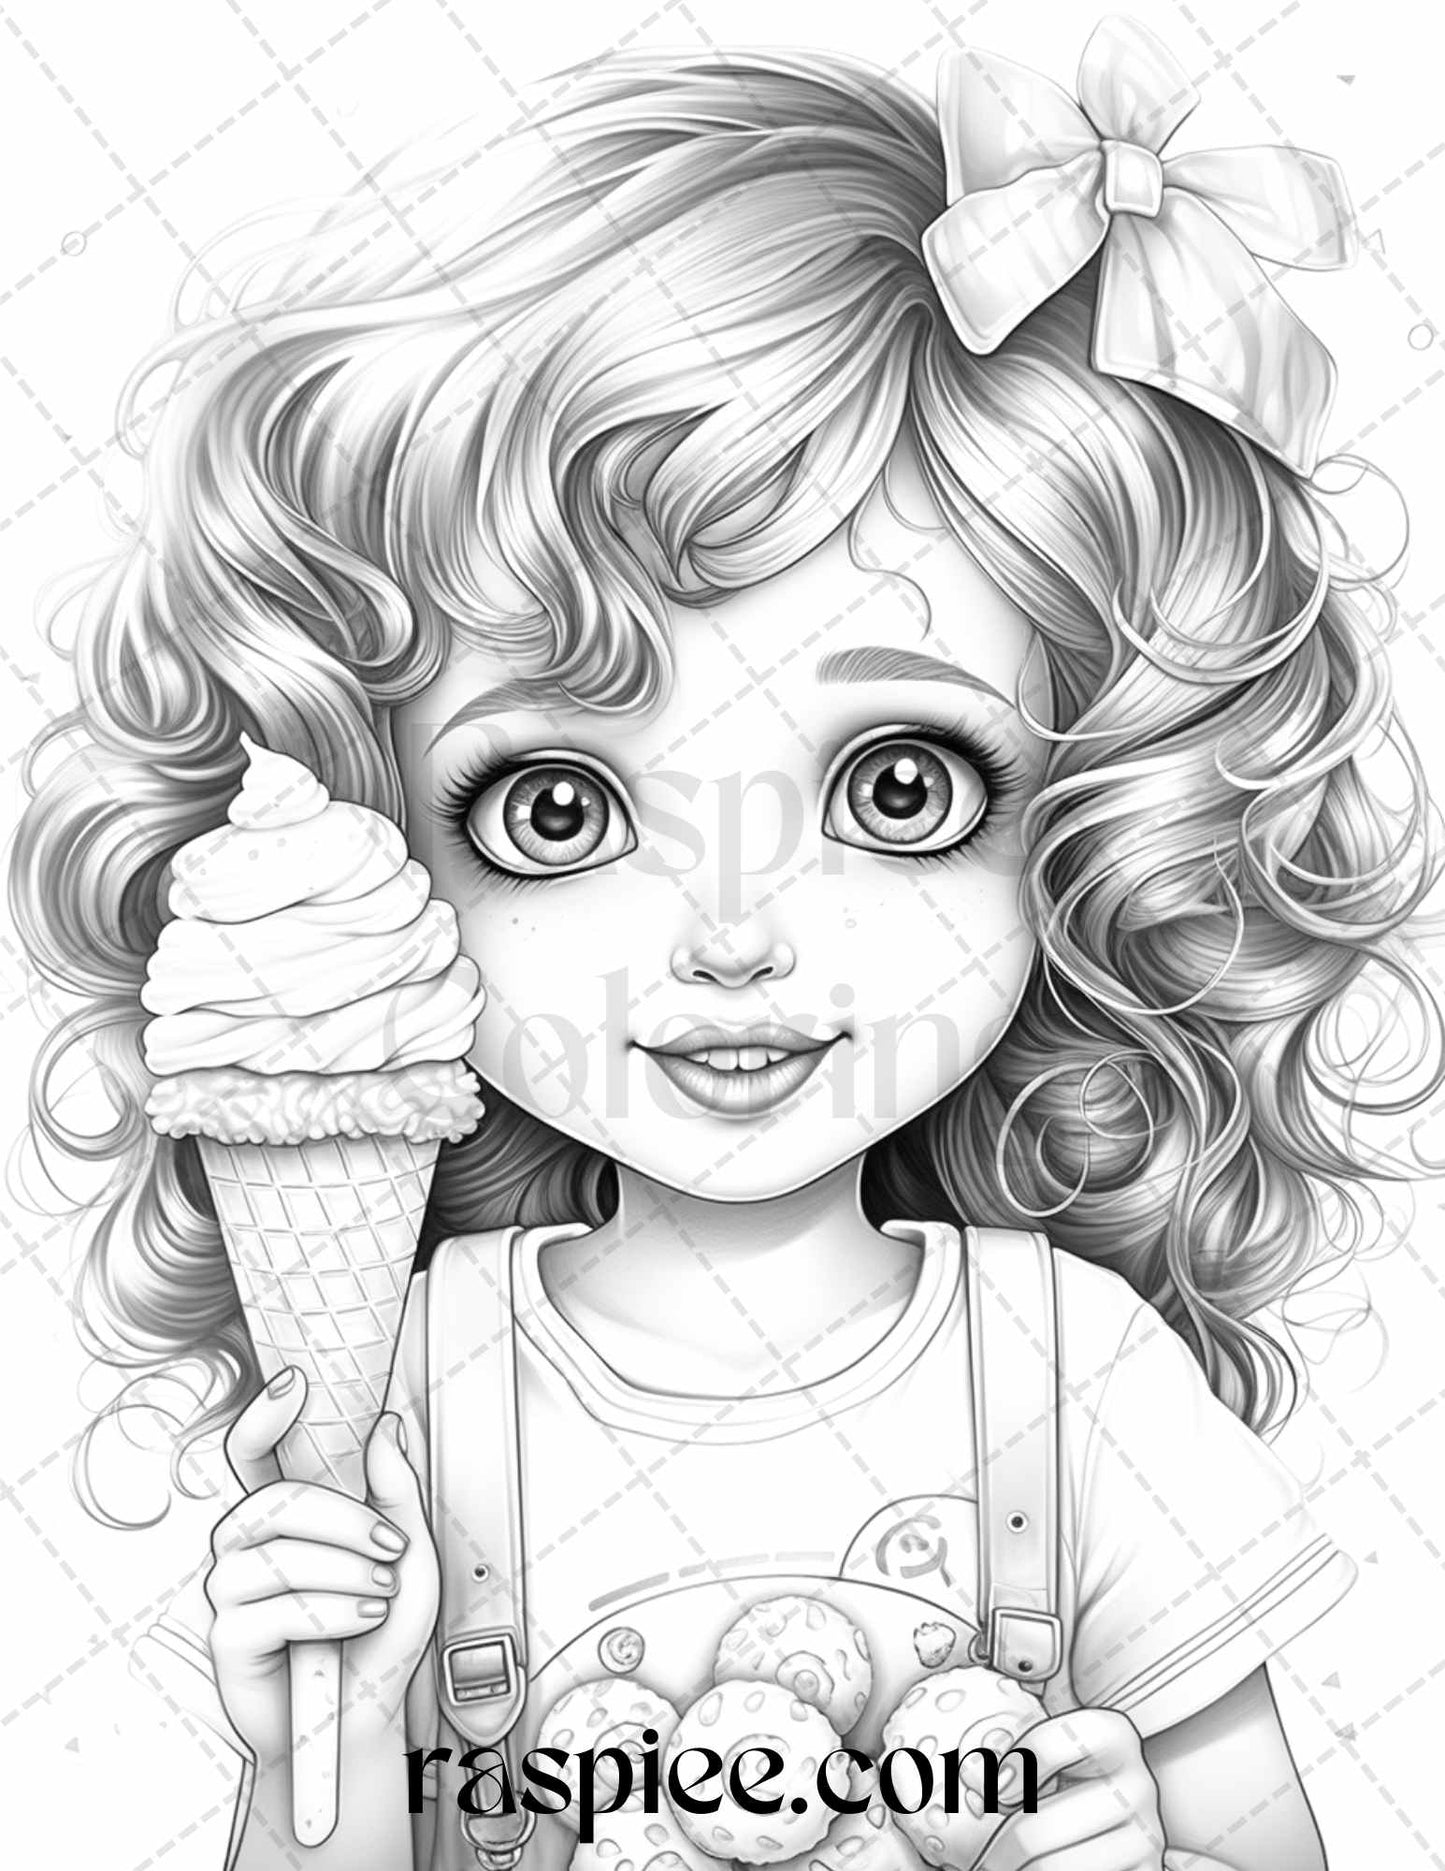 Girls with Ice Cream Coloring Pages, Printable Grayscale Coloring Pages, Adorable Coloring Pages for Adults and Kids, Ice Cream Themed Grayscale Images, Cute Girls Coloring Pages